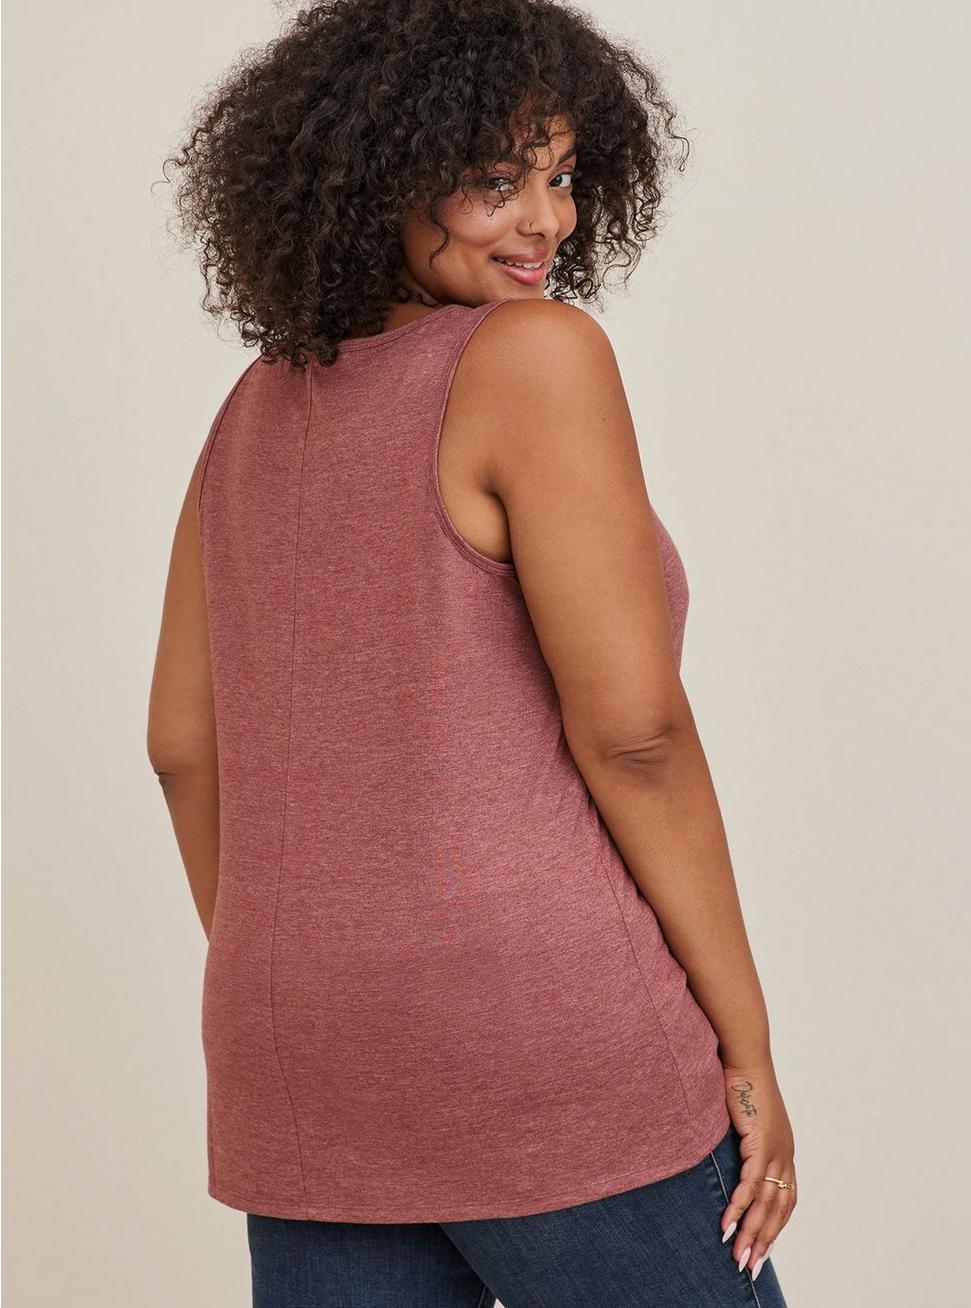 Everyday Tank - Signature Jersey Feather Heart Brown, MADDER BROWN, alternate